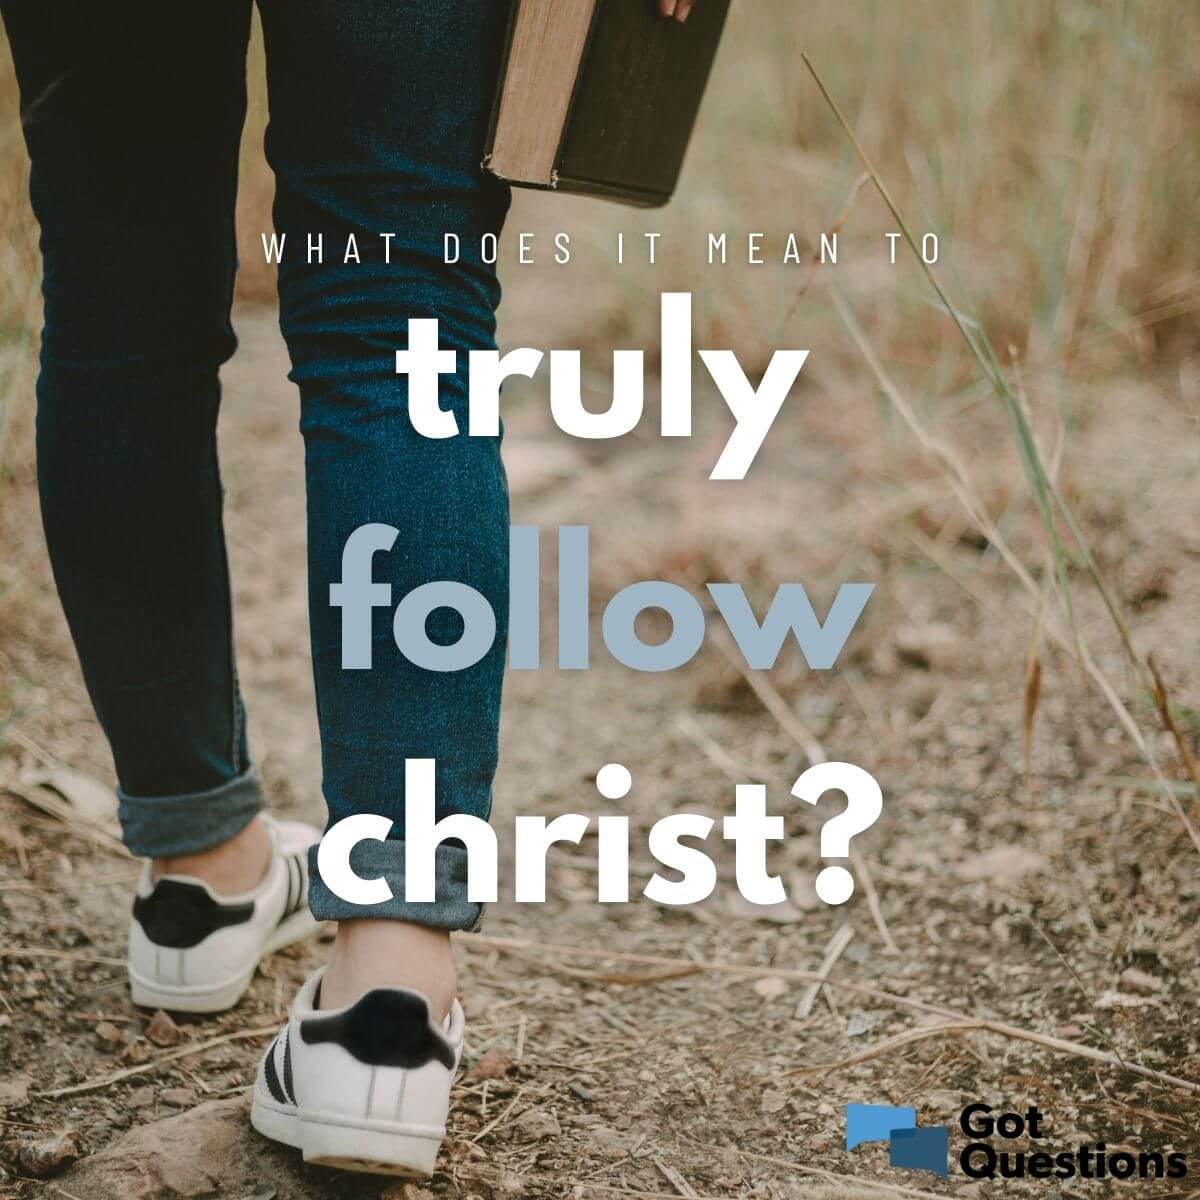 What did Jesus mean when He said, “Take up your cross and follow